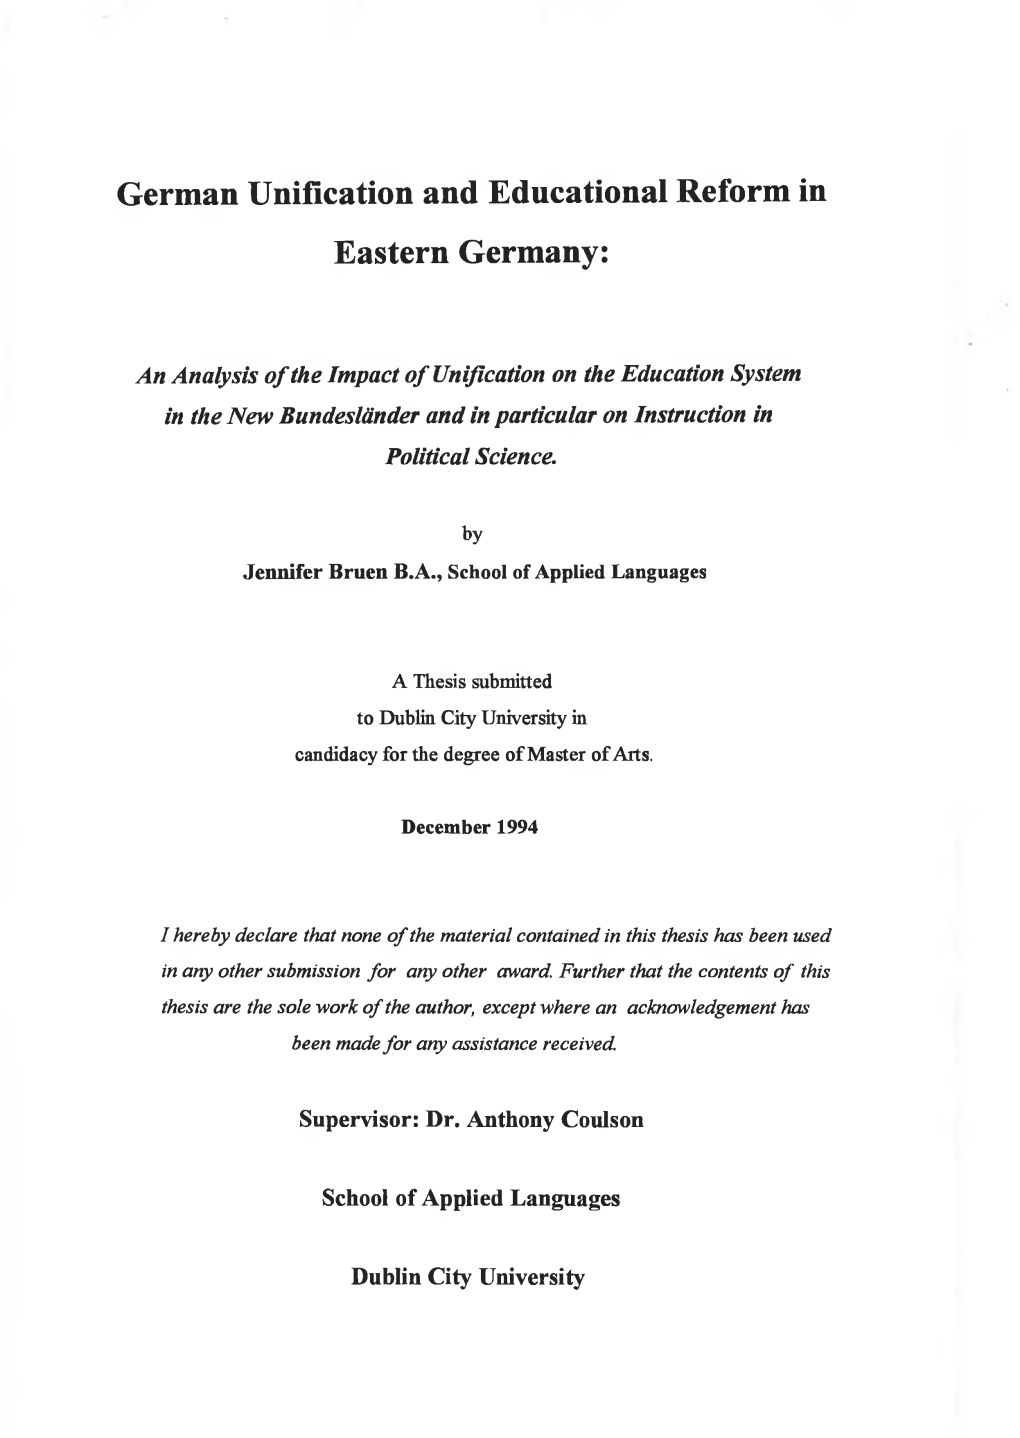 German Unification and Educational Reform in Eastern Germany